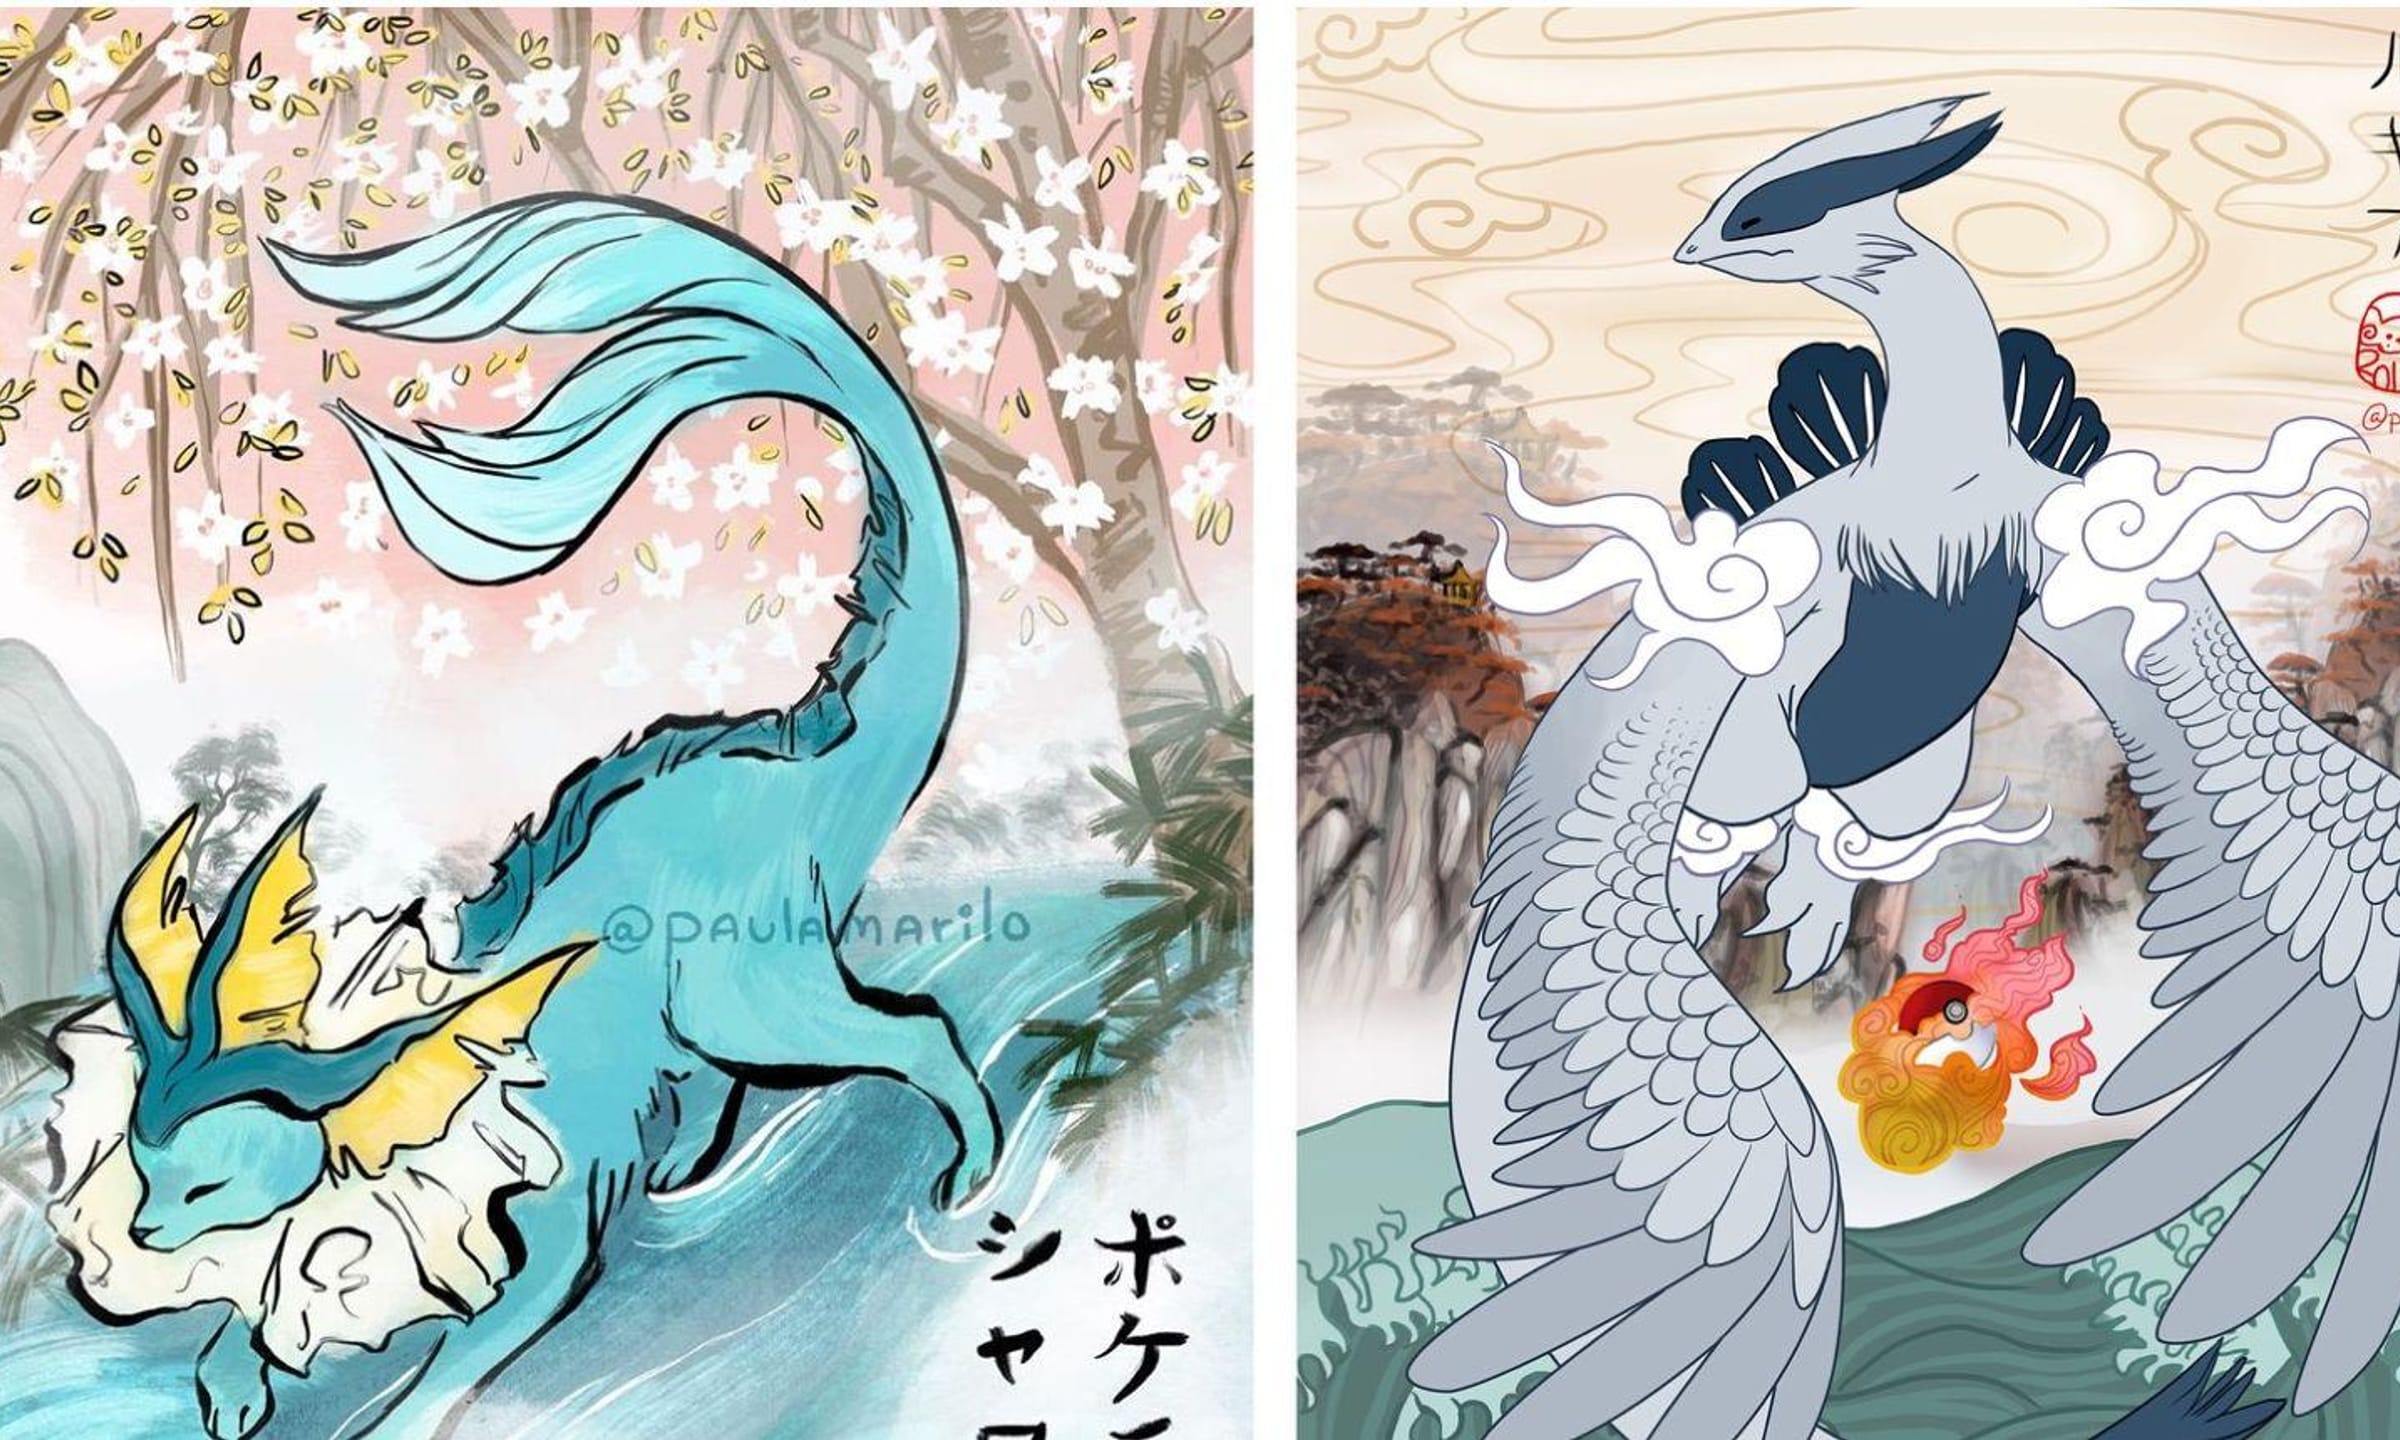 This Artist Reimagines Pokémon In The Style Of Traditional Japanese Art